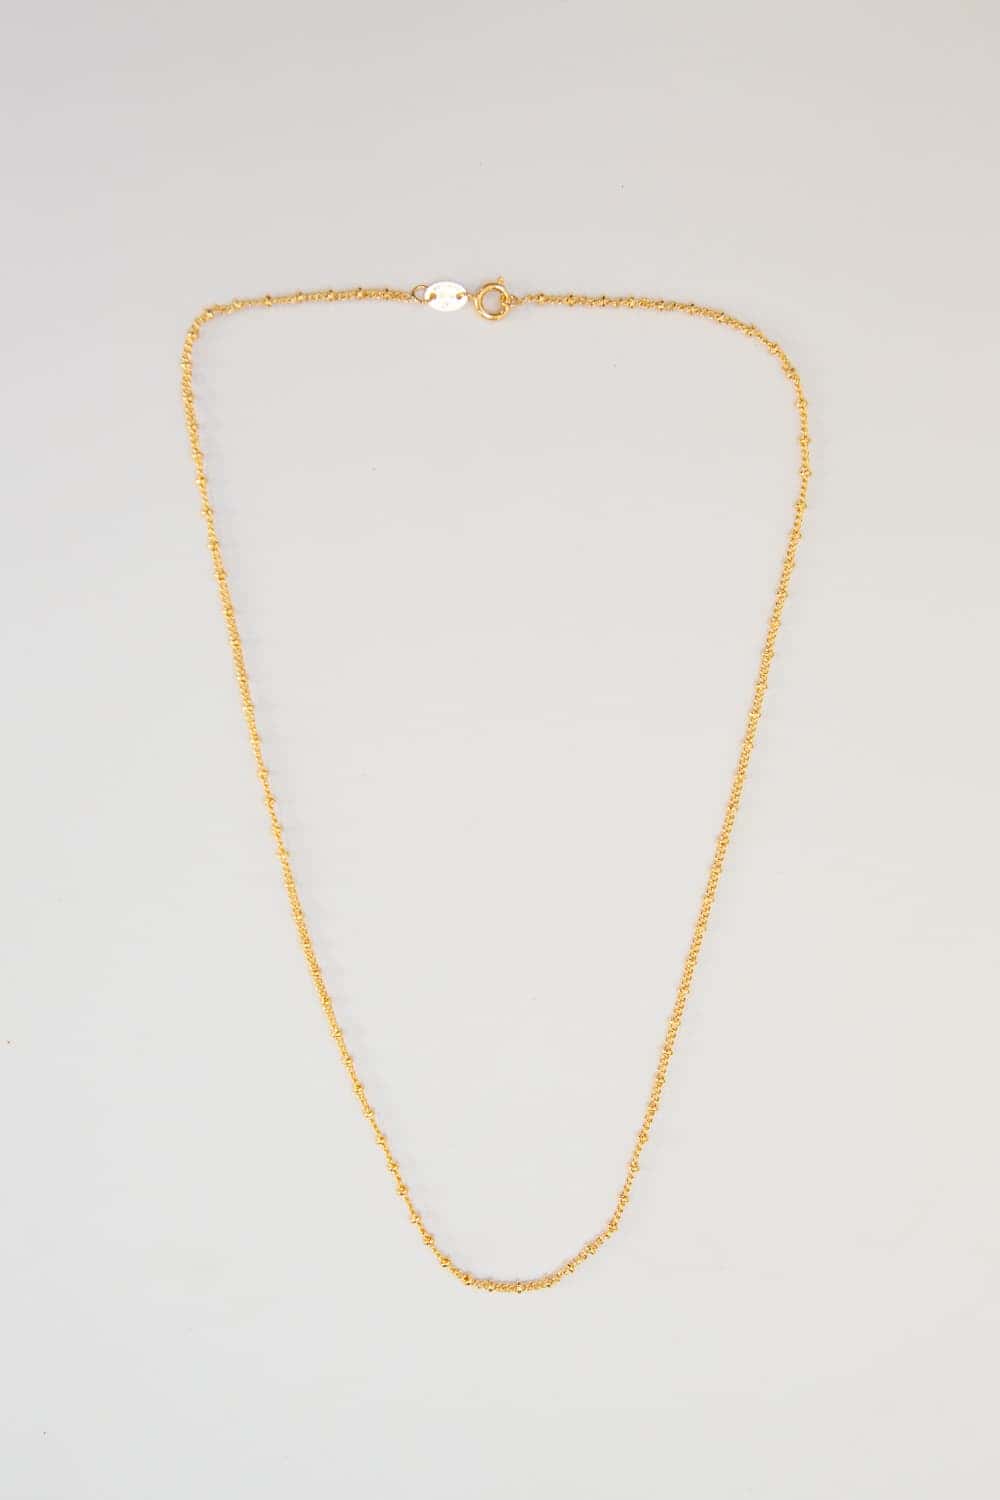 Beaded Chain Necklace (thin) – S t a r l i t e